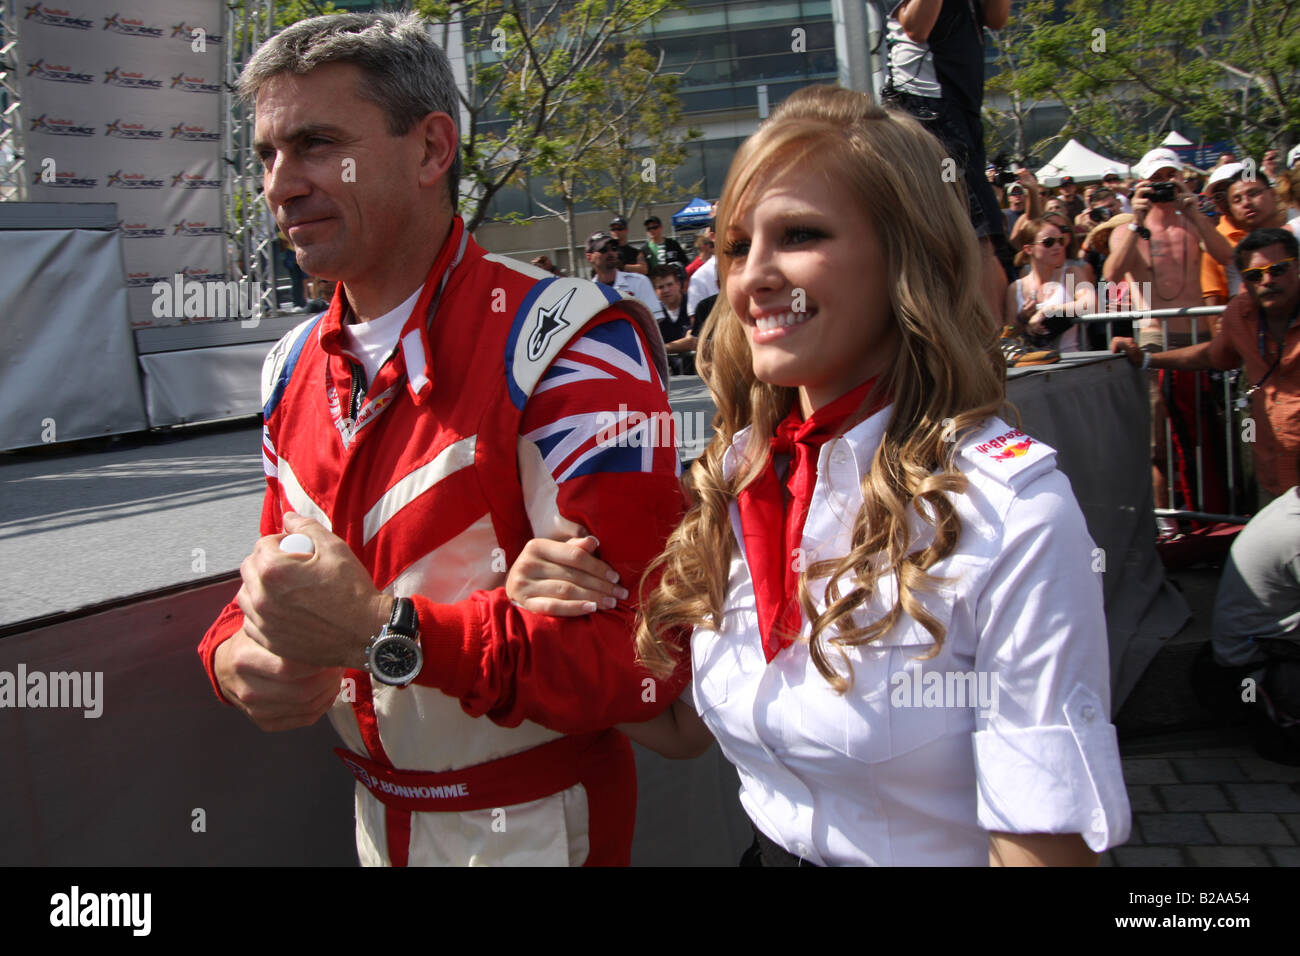 Paul Bonhomme walks with Red Bull Flight Girl to the awards ceremony for the Red Bull Air Race World Series in Detroit, MI. Stock Photo